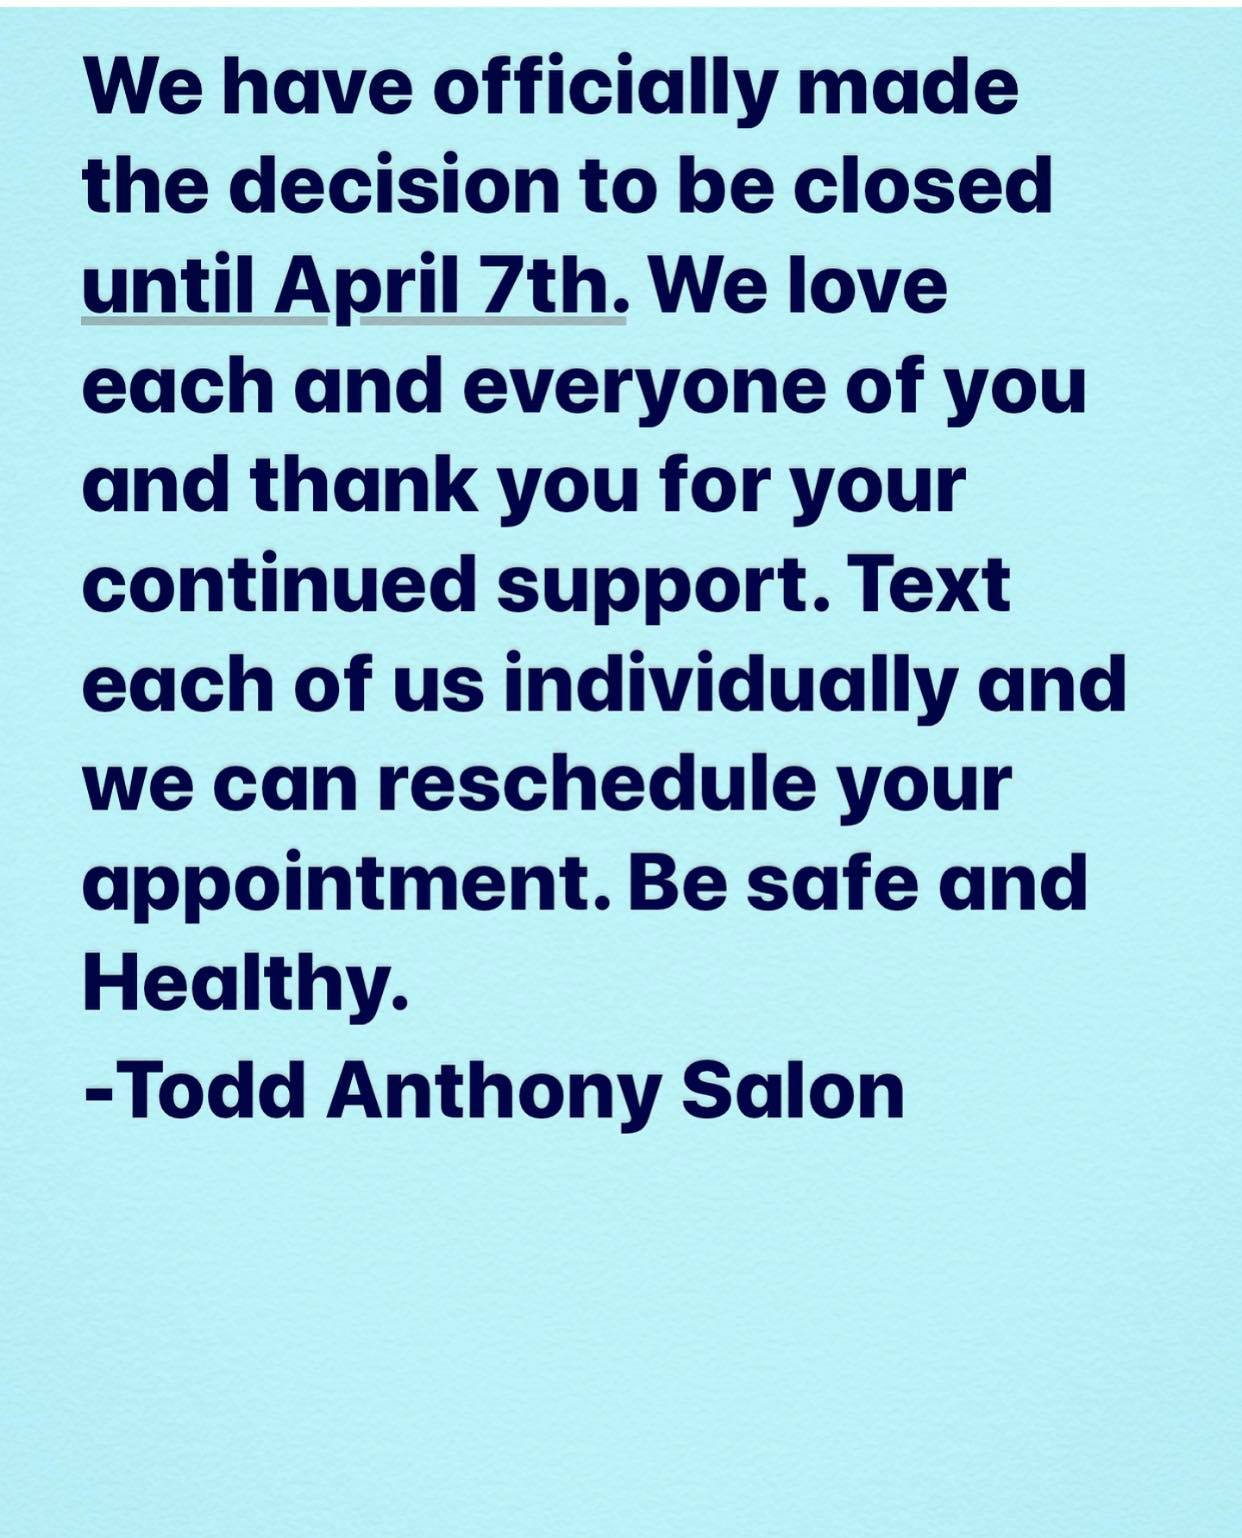 Todd Anthony Salon 15309 Lebanon Rd, Old Hickory Tennessee 37138